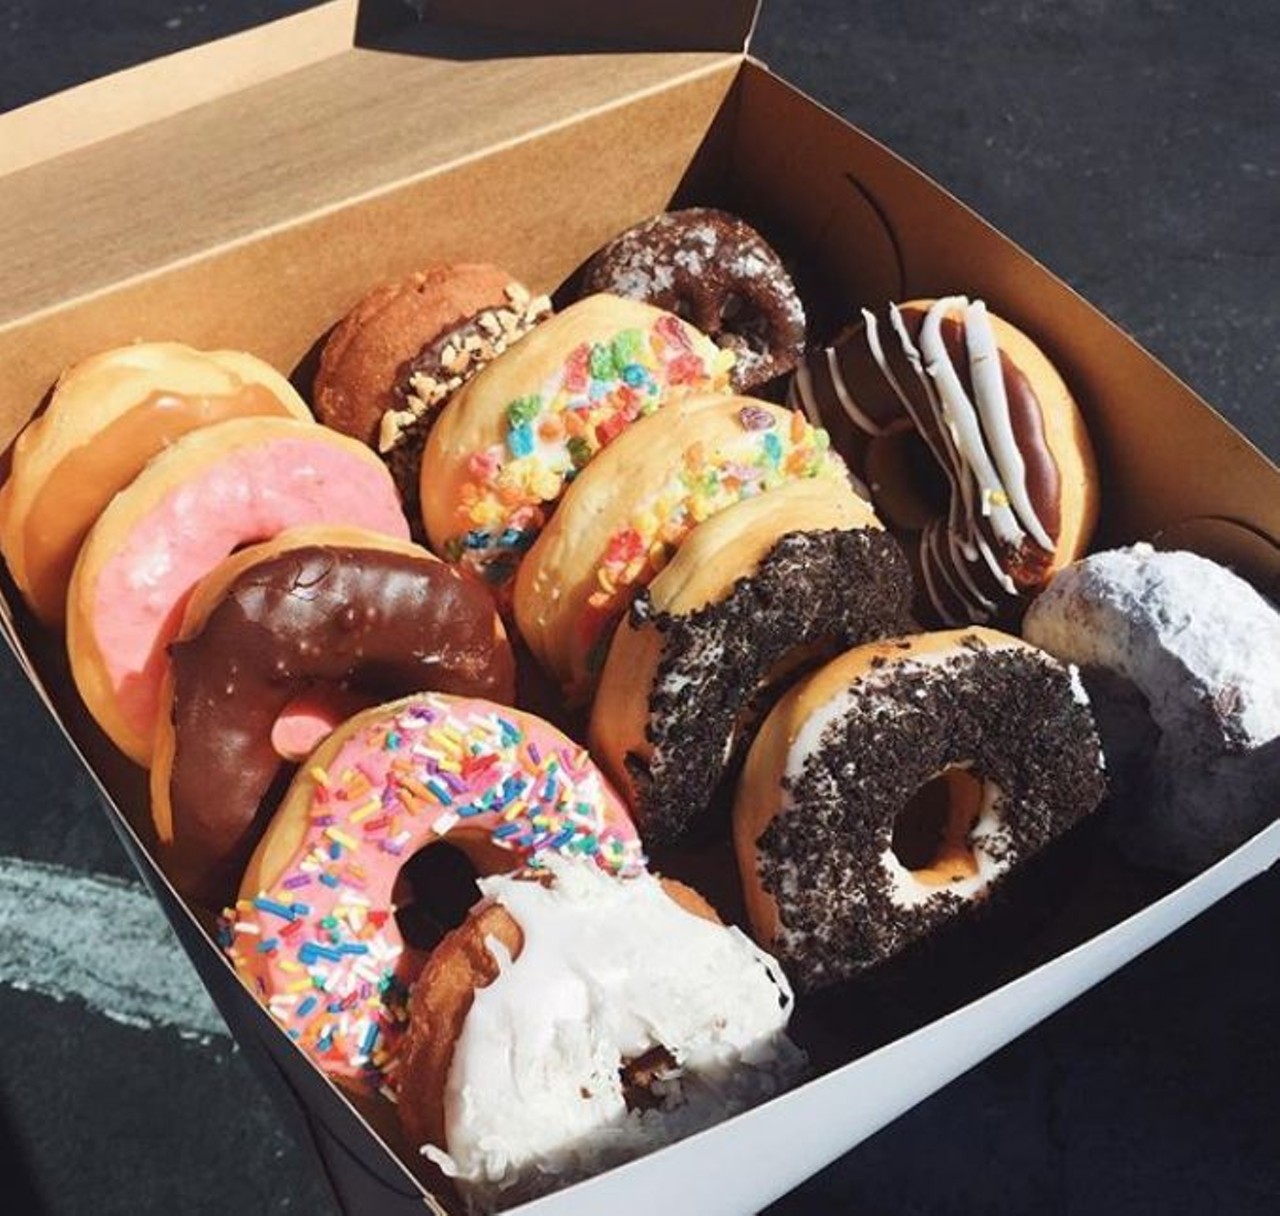 Bakery Plus  
915 E. Michigan St., 407-849-1888
Get your doughnut fix on the fly at this simple neighborhood staple.
Photo via ky.crate / Instagram